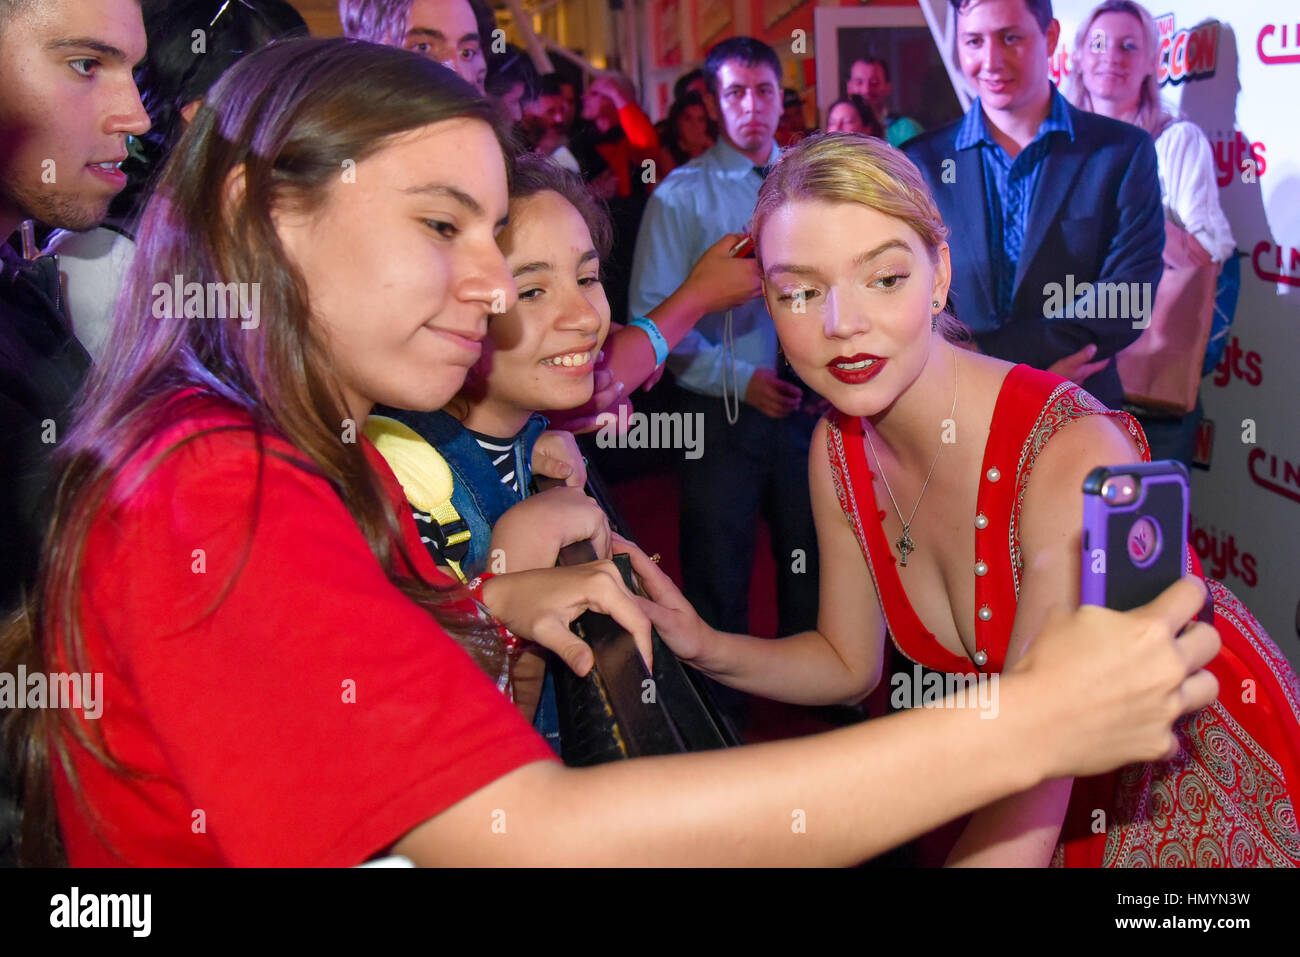 Buenos Aires, Argentina - Dec 8, 2016: American actress and model Anya Taylor-Joy with fans at the Argentina Comic Con convention. Stock Photo